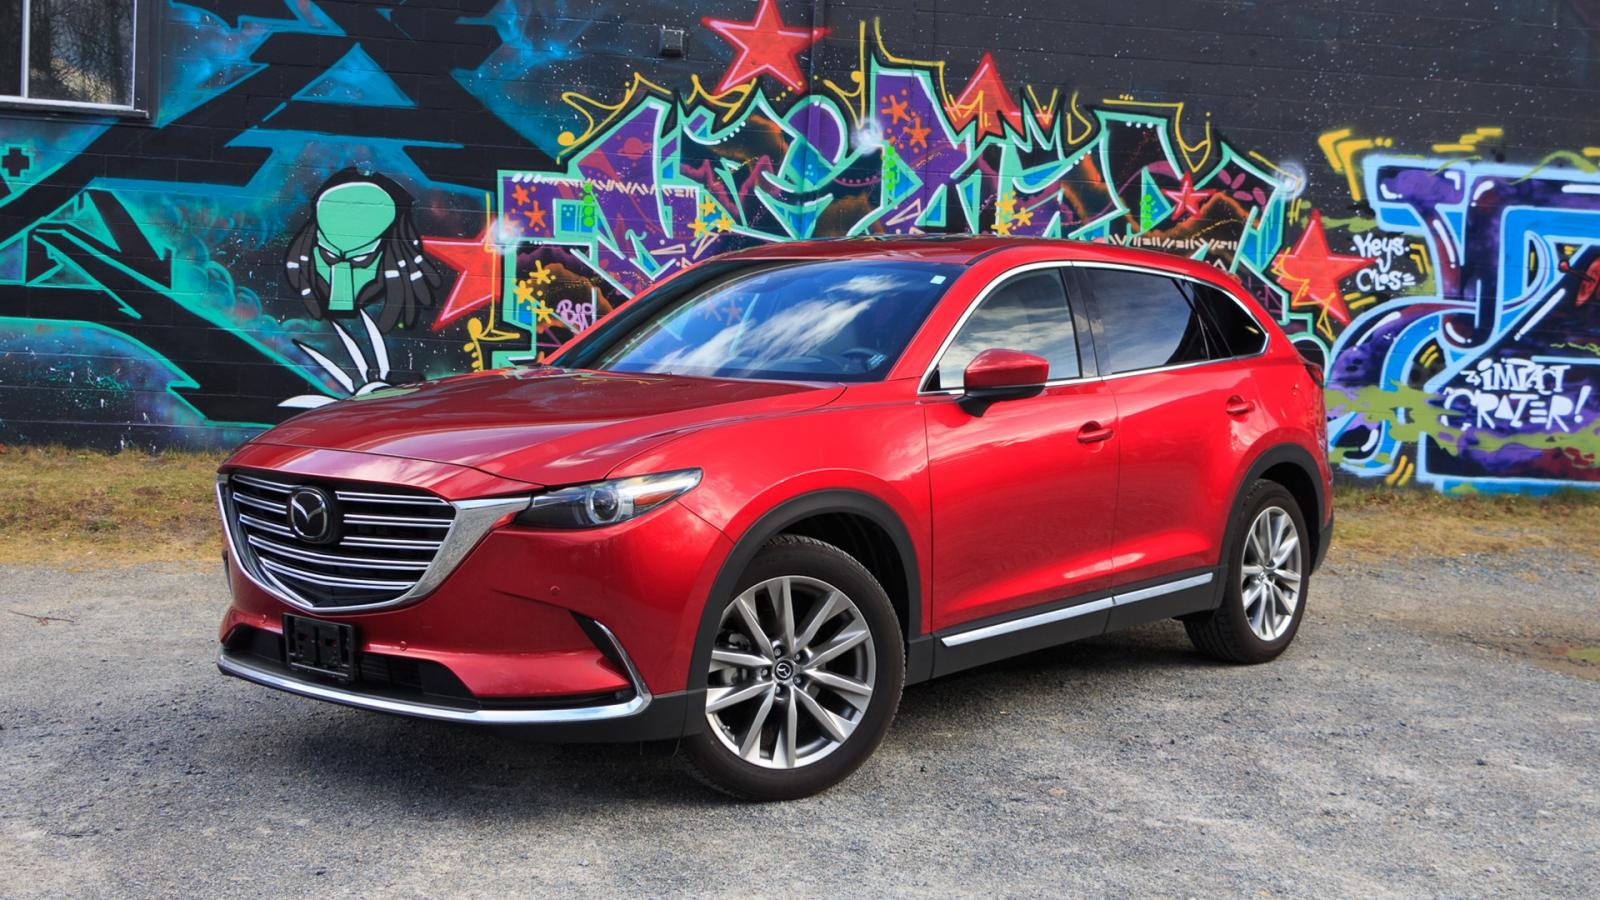 Mazda CX-9 2019 Philippines Review: A stunning good look 3-row SUV